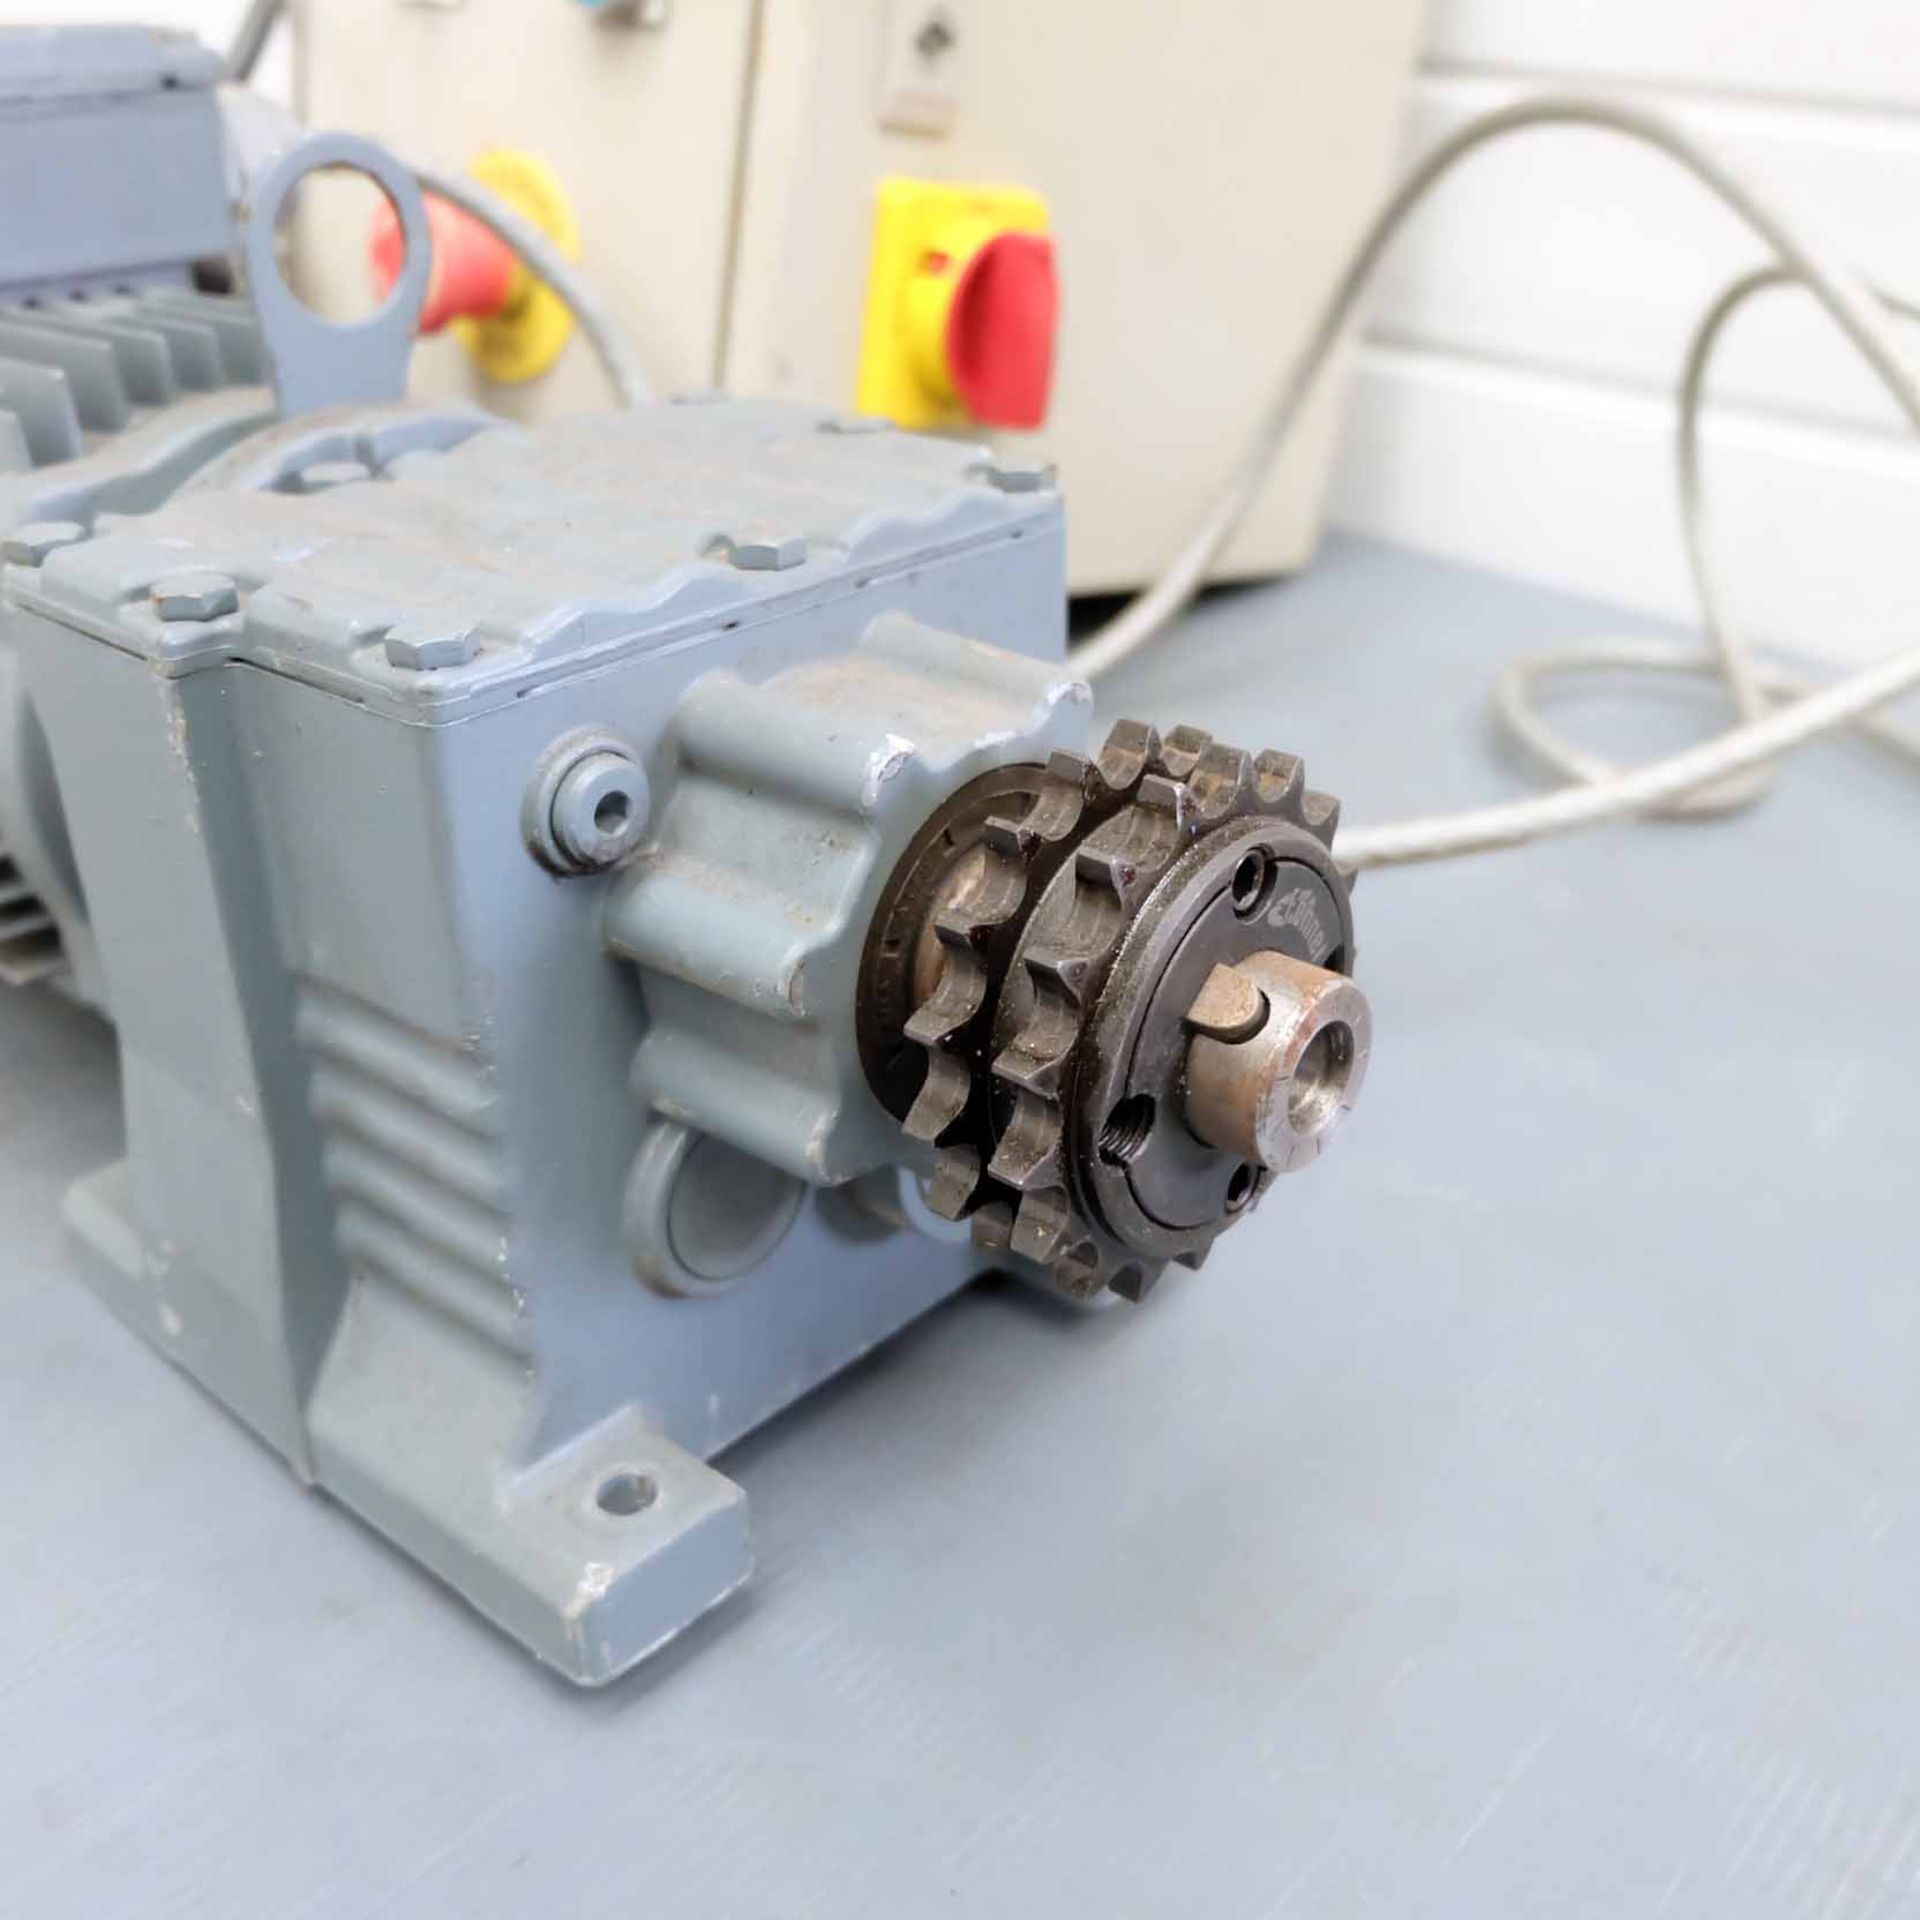 SEW Eurodrive Type R27 Motor & Gearbox With Electric Control Panel. Motor 0.55KW-S1. - Image 6 of 7